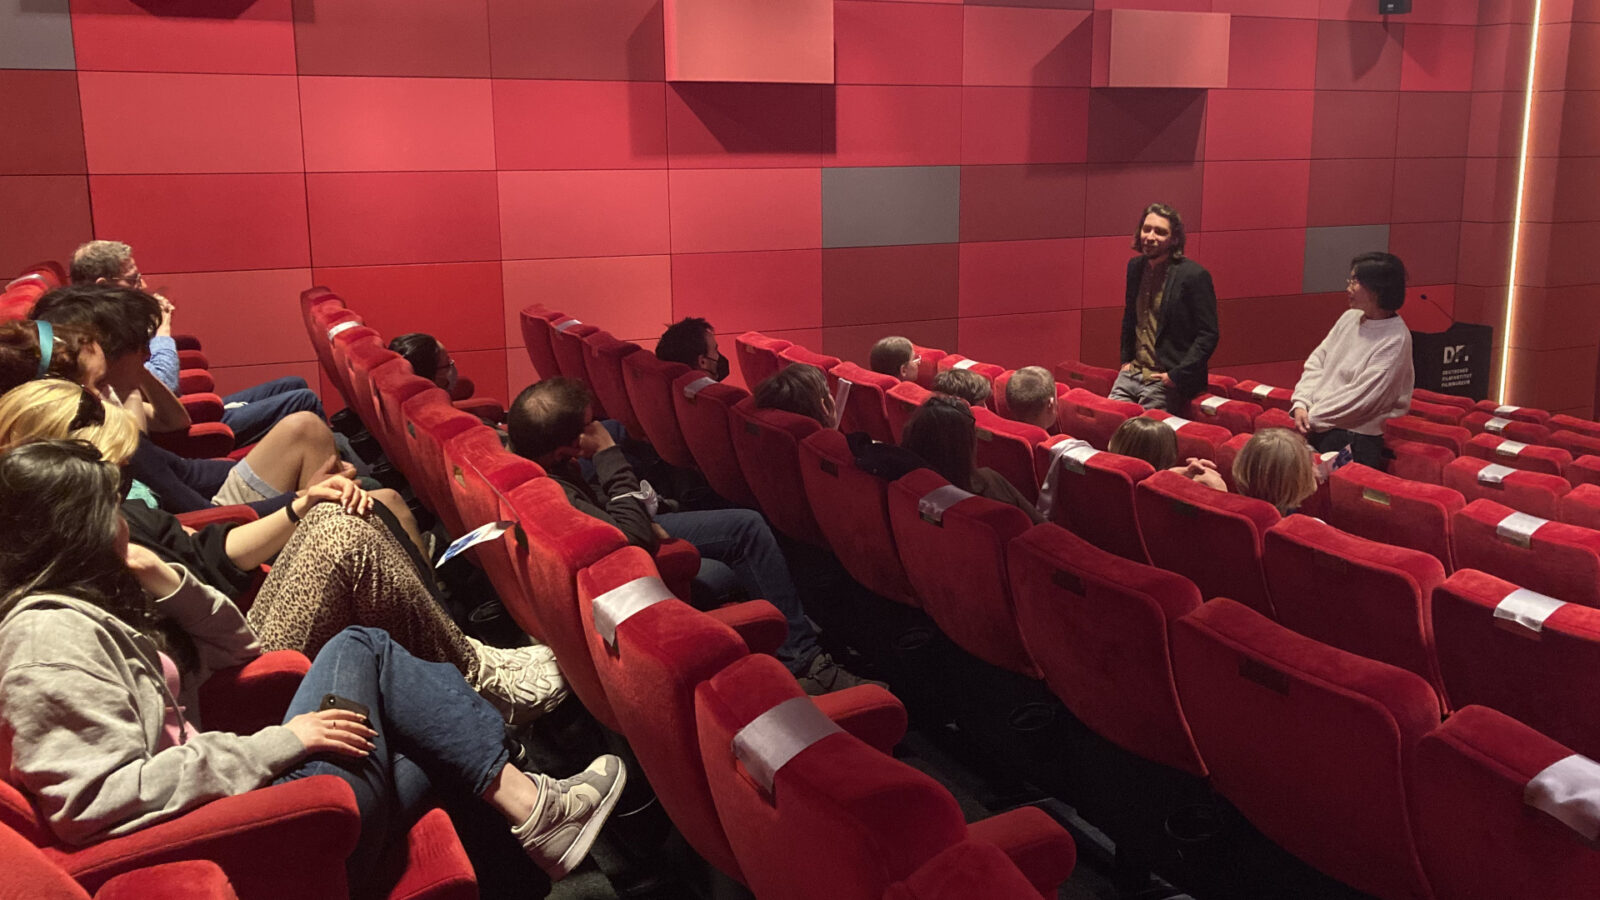 A guest talks to members of the Blickwechsel Jetzt film club at the DFF cinema.